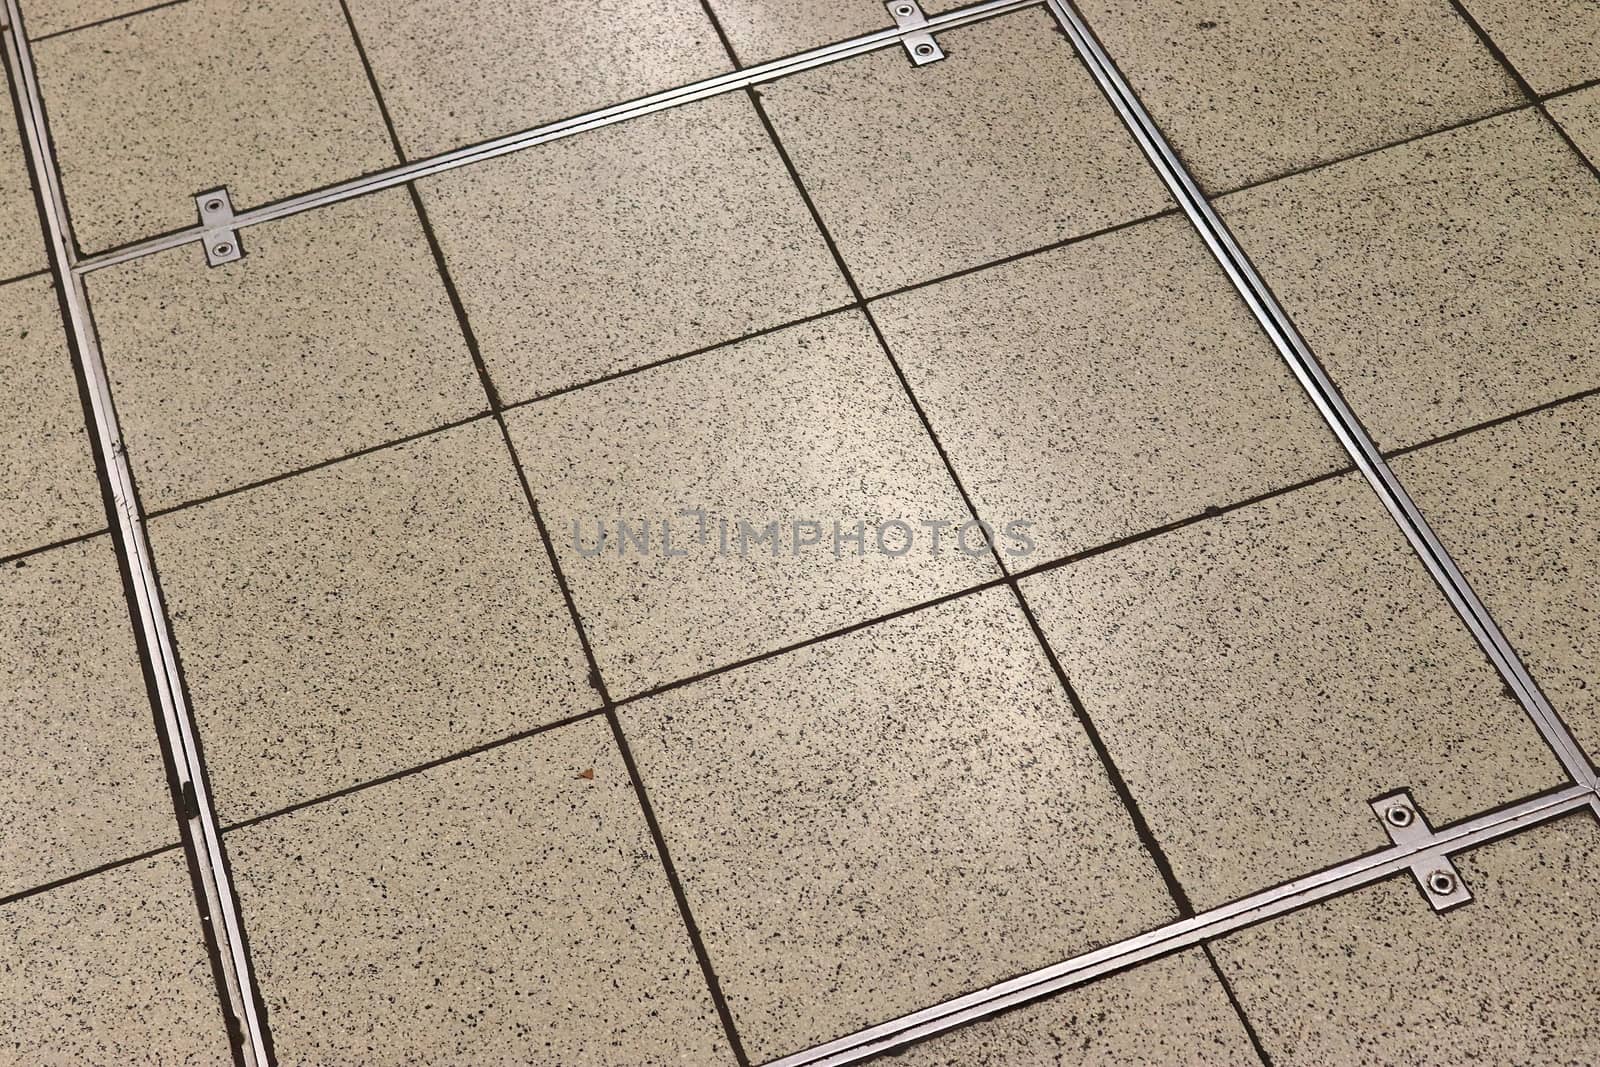 Detailed close up texture on structured floor tiles on the groun by MP_foto71